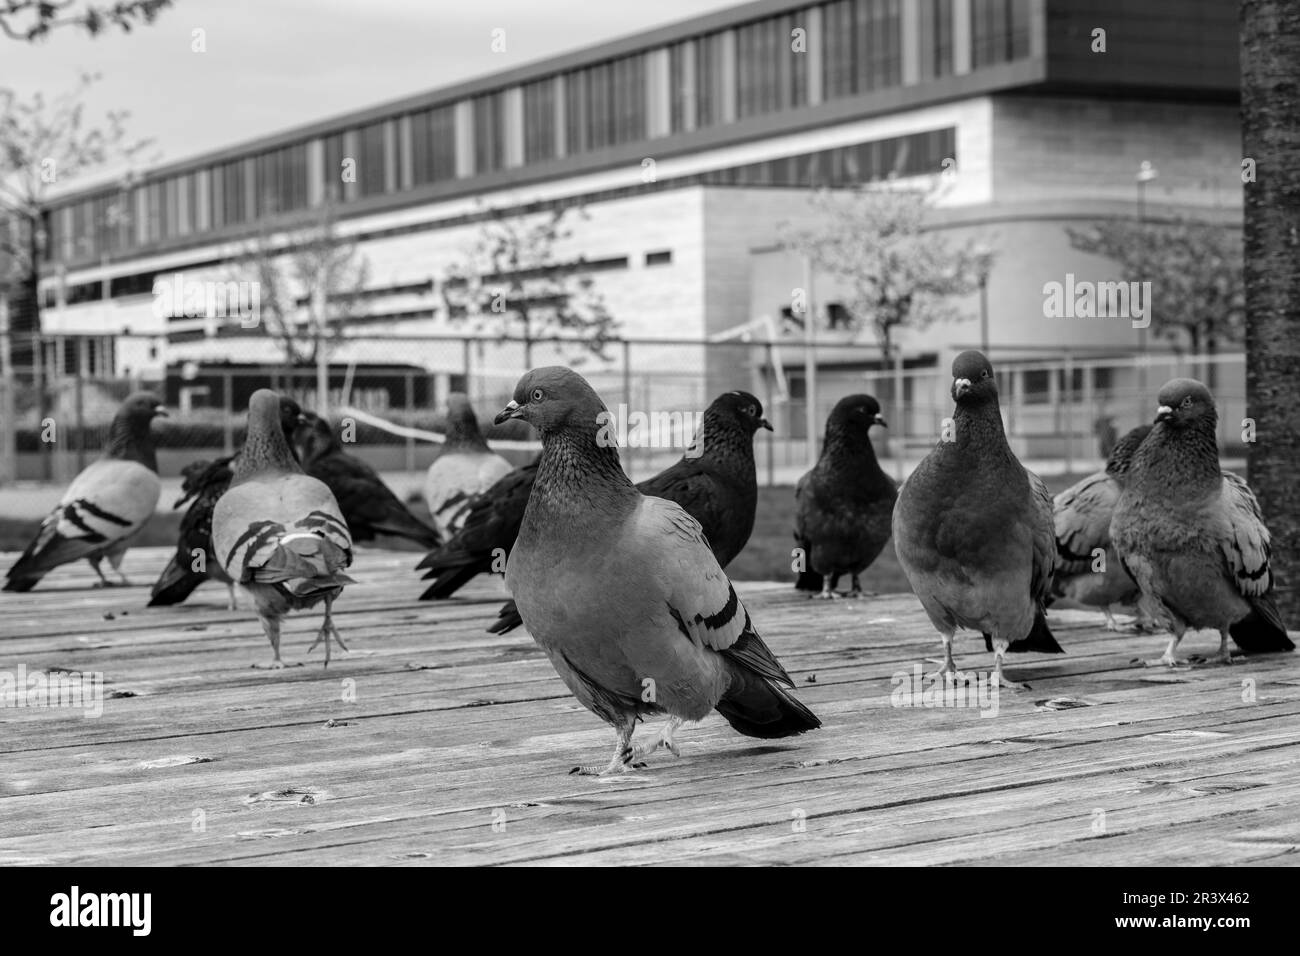 Sandnes, Norway, May 18 2023, Group Or Flock Of Wild Pigeons On The Boardwalk in Sandnes Harbour With No People Stock Photo